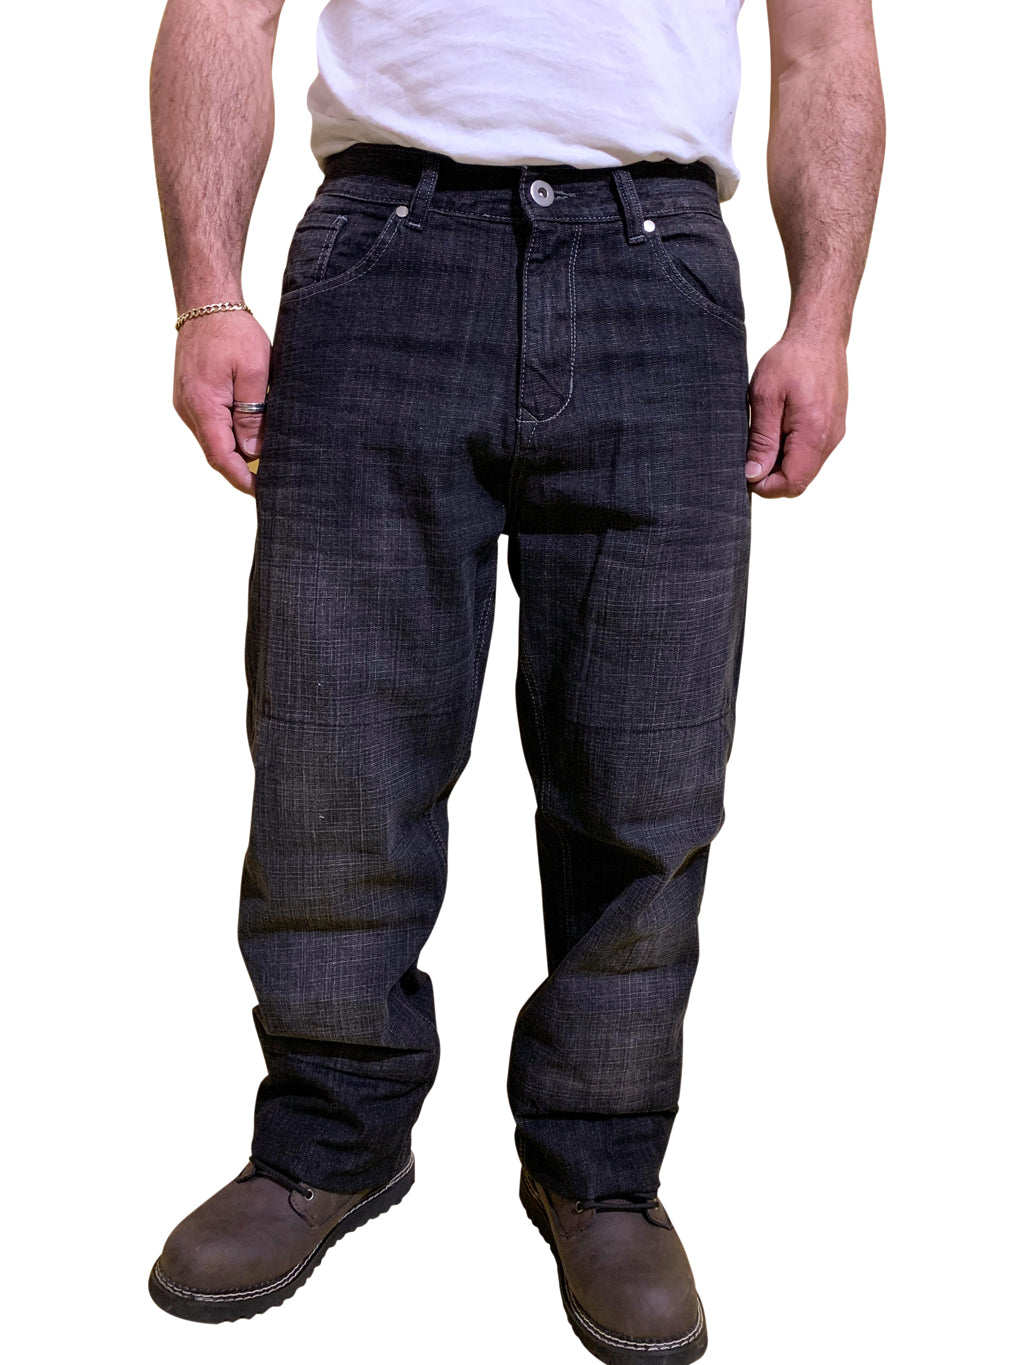 motorcycle jeans with Kevlar